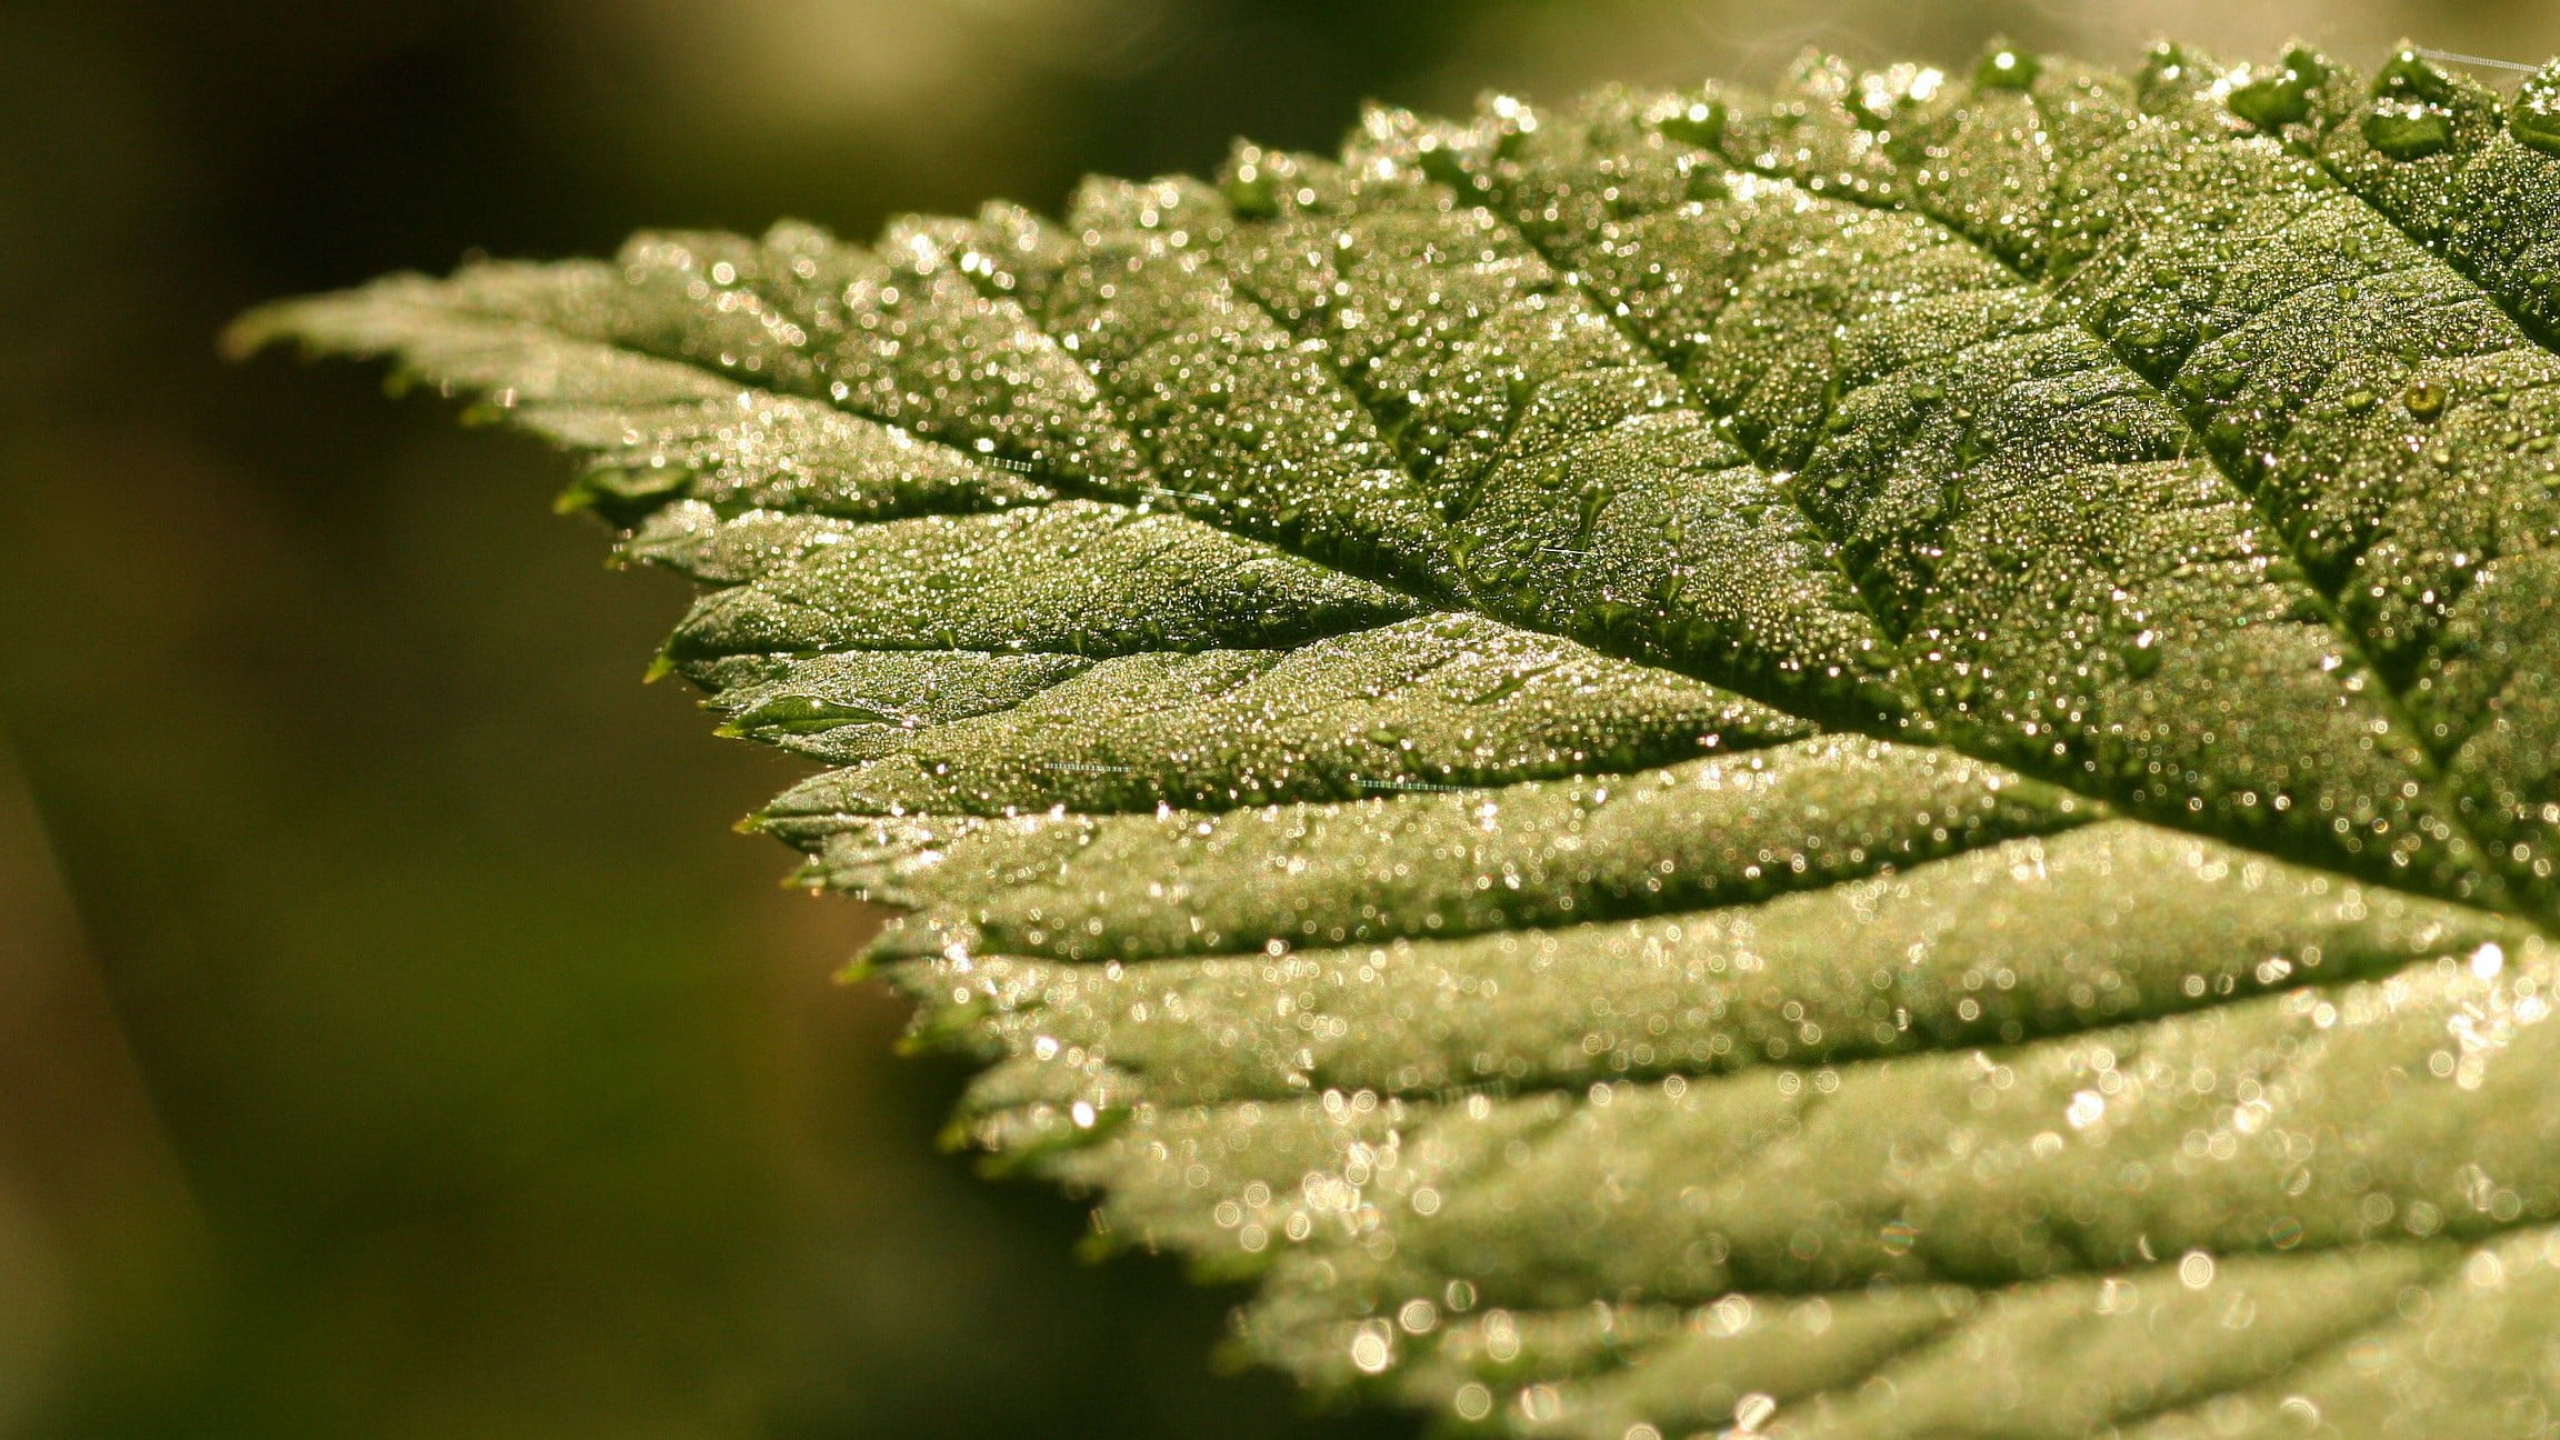 Green Leaf: A close-up view of dew water on the complex-structured vegetation organ, The leaf margin. 2560x1440 HD Wallpaper.